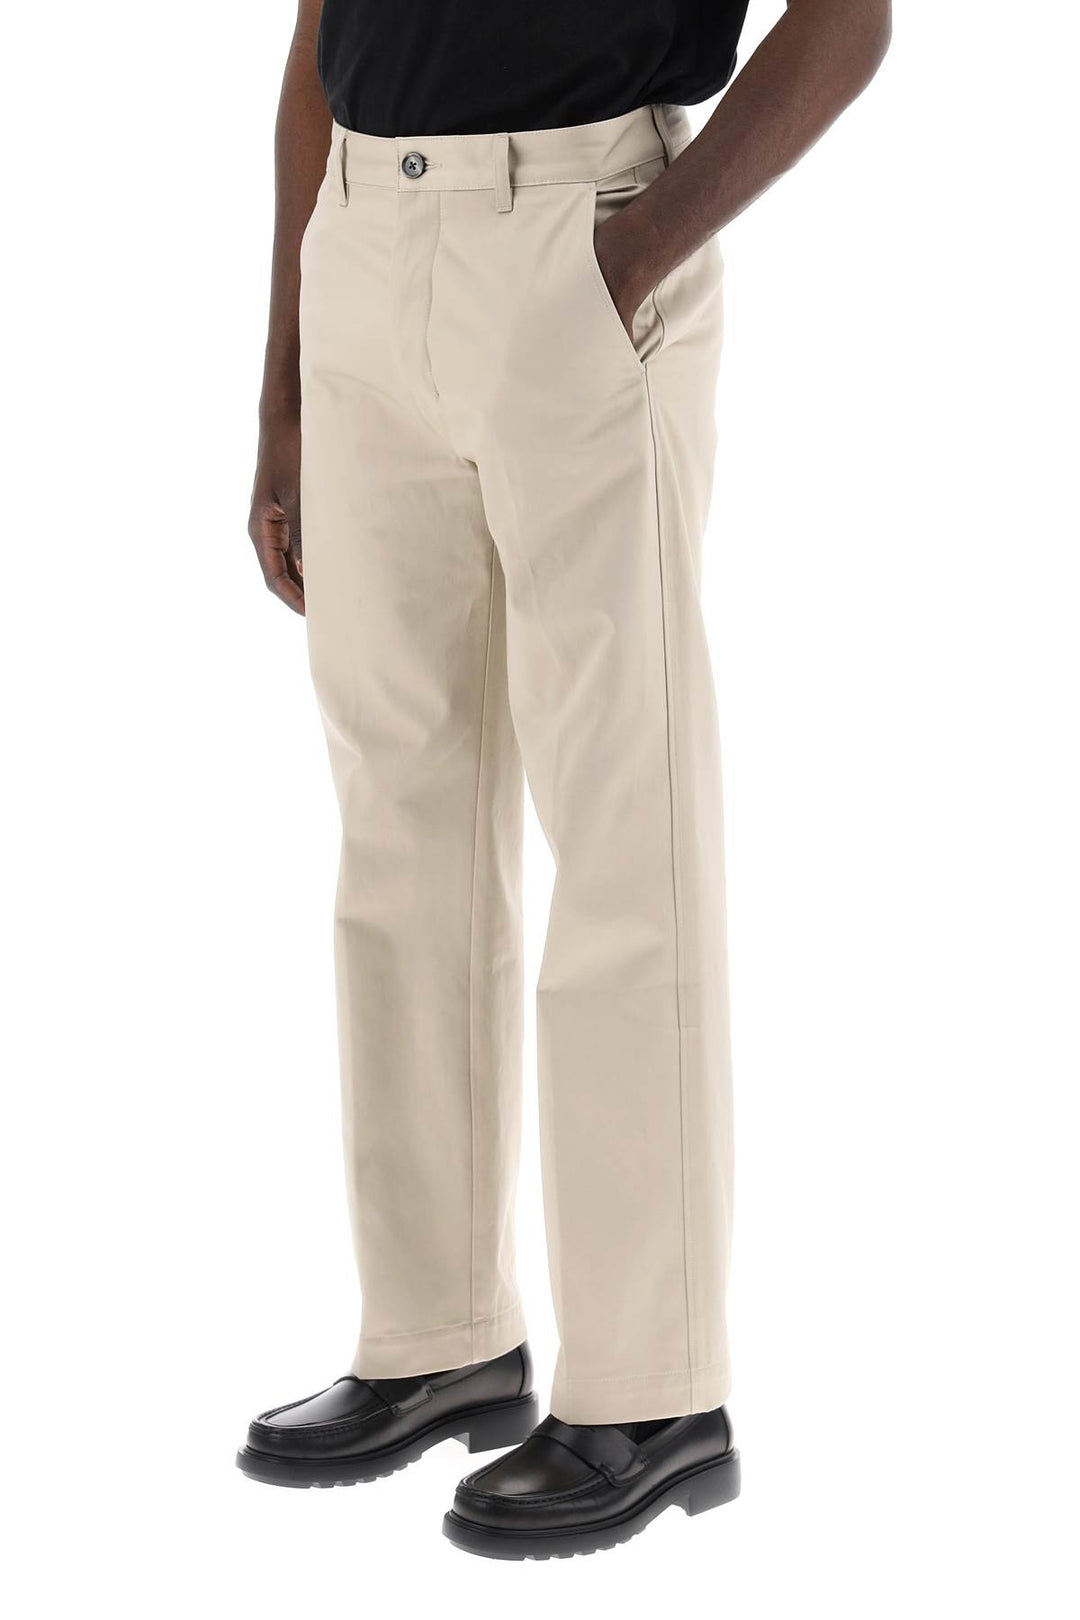 Ami Alexandre Matiussi Cotton Satin Chino Pants In   Beige